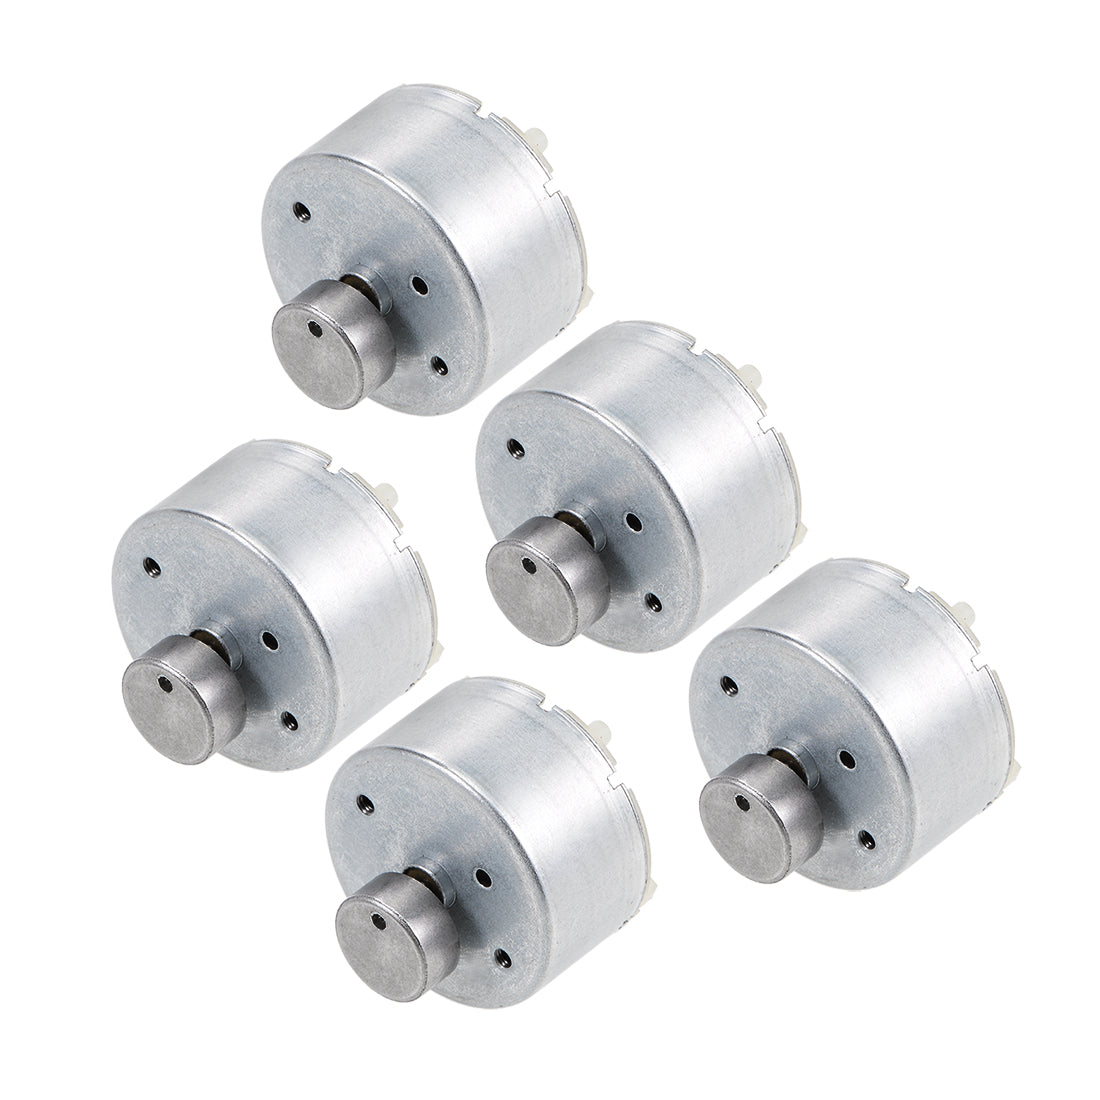 uxcell Uxcell Vibration Motors DC 6V 60mA1300RPM Vibrating Motor Strong Power for DIY Electric  30.6x32mm 5Pcs